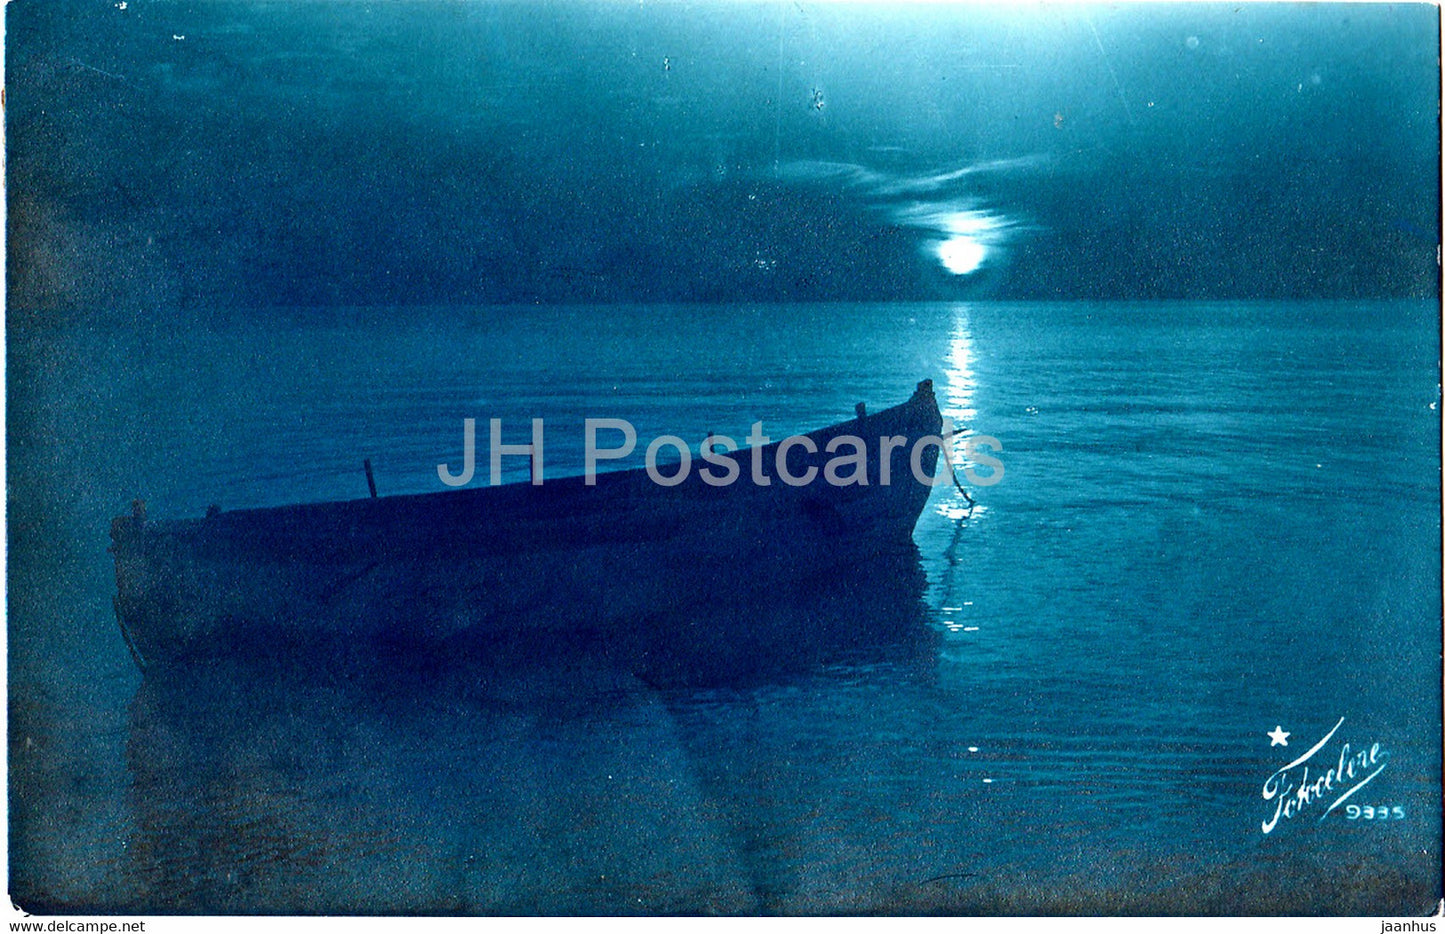 boat at the sea - Fotocelere 9335 - old postcard - 1924 - Italy - used - JH Postcards